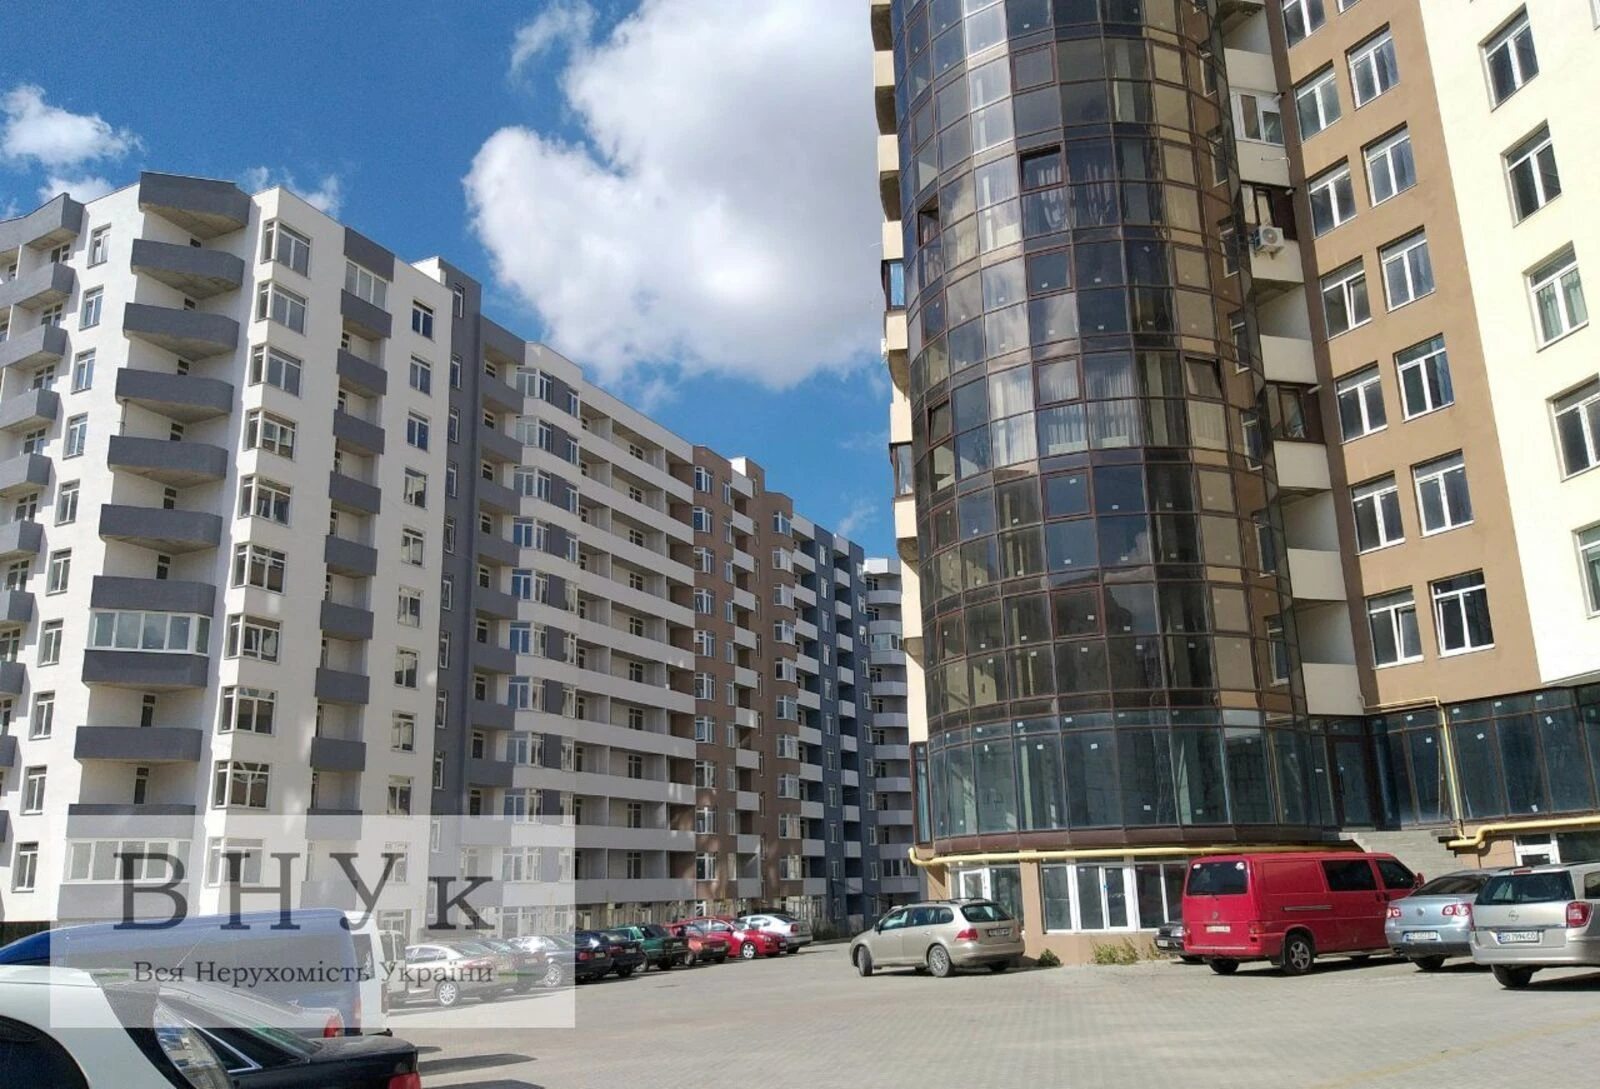 Apartments for sale. 2 rooms, 55 m², 10th floor/11 floors. Smakuly vul., Ternopil. 